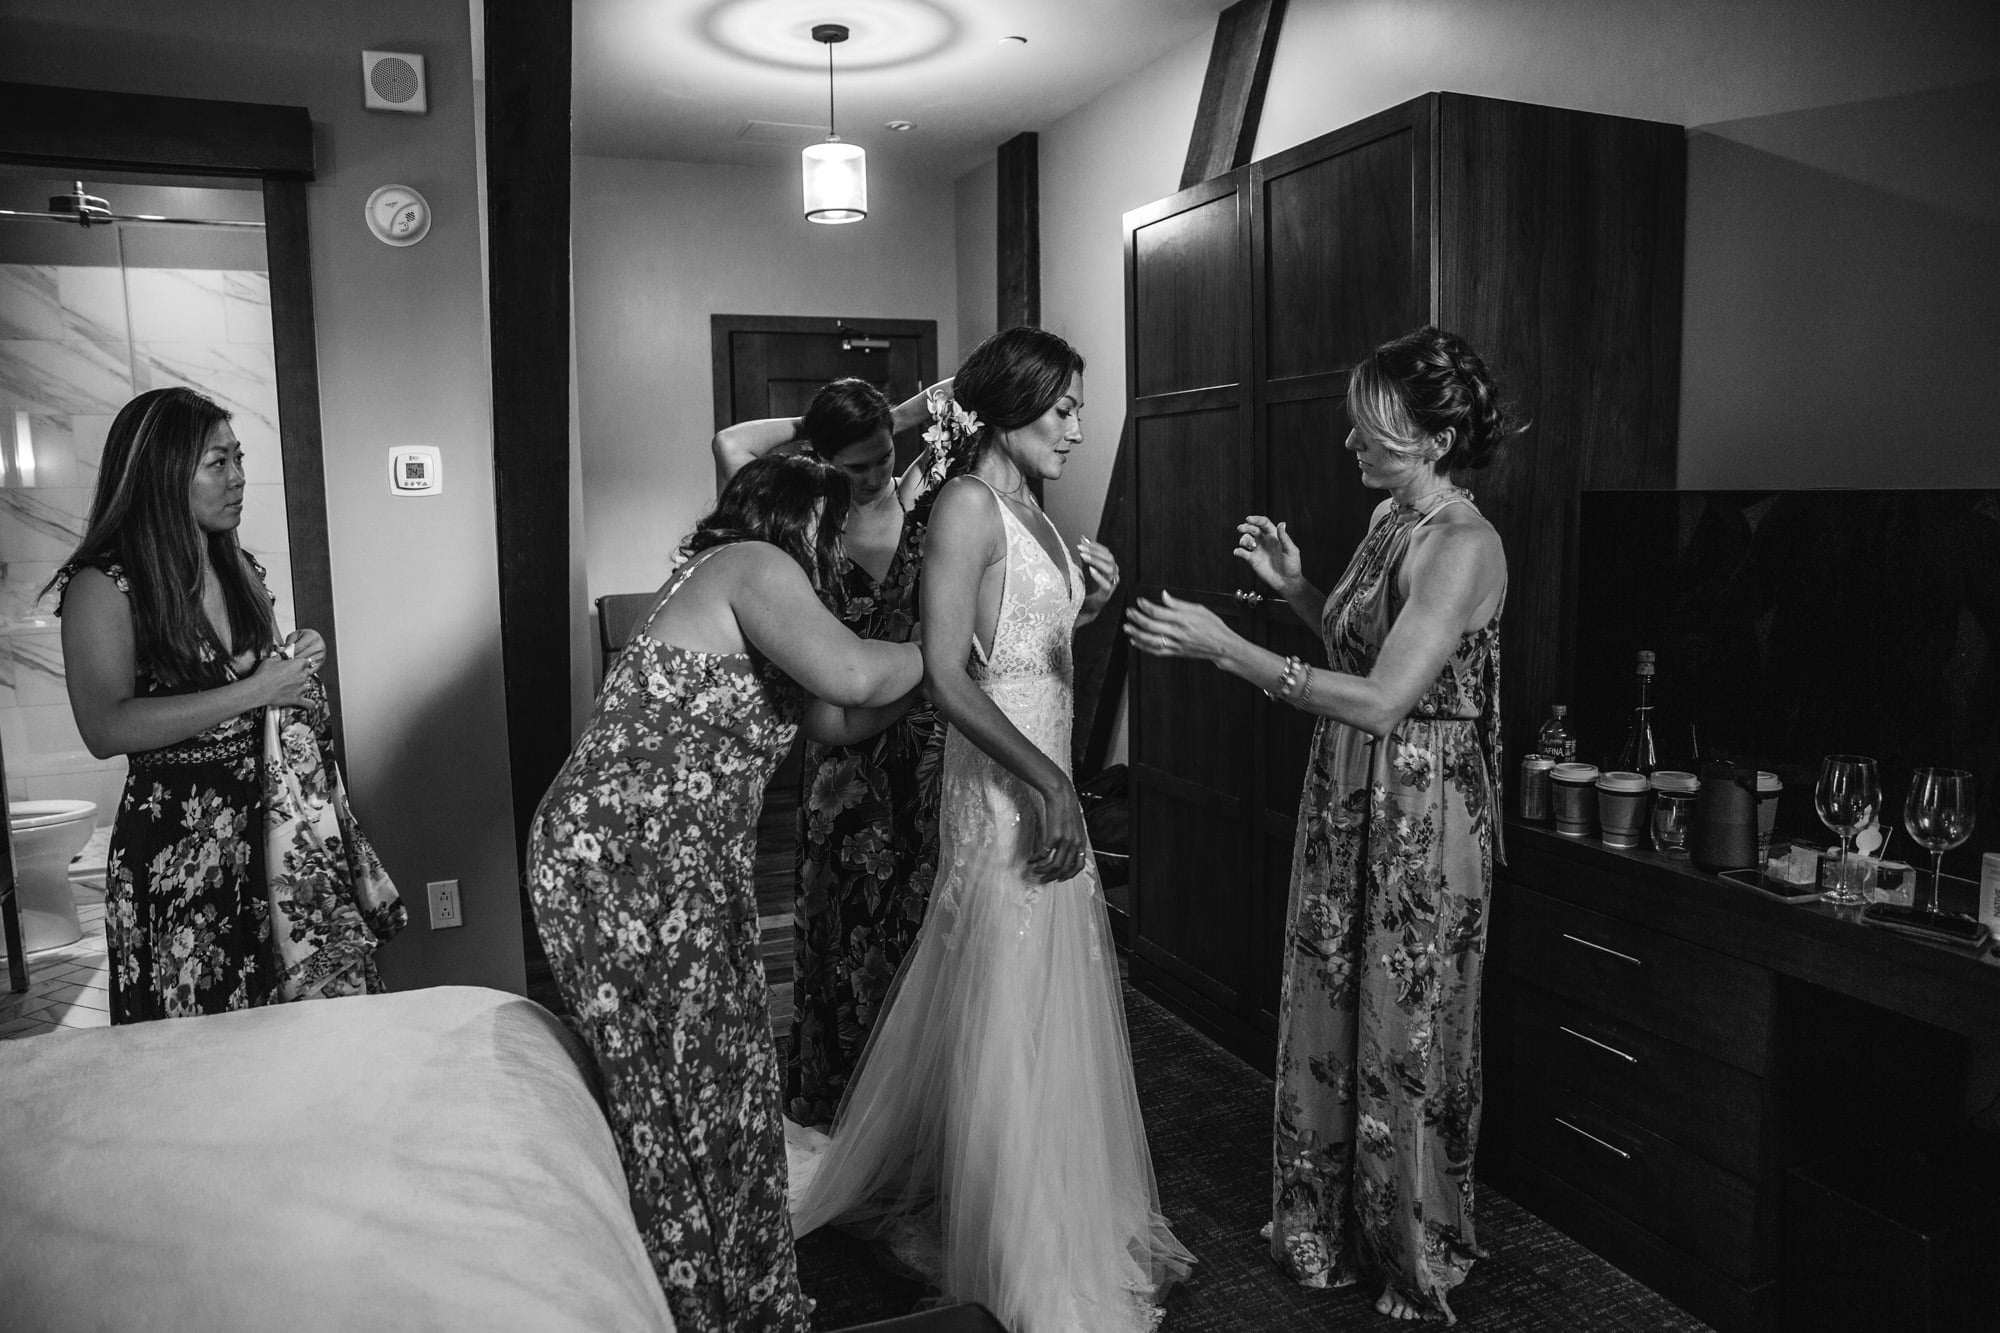 bridesmaids getting ready, bridesmaids floral dresses, flower bridesmaid dresses, bride getting ready, the Crawford hotel, union station wedding denver, bride getting into dress